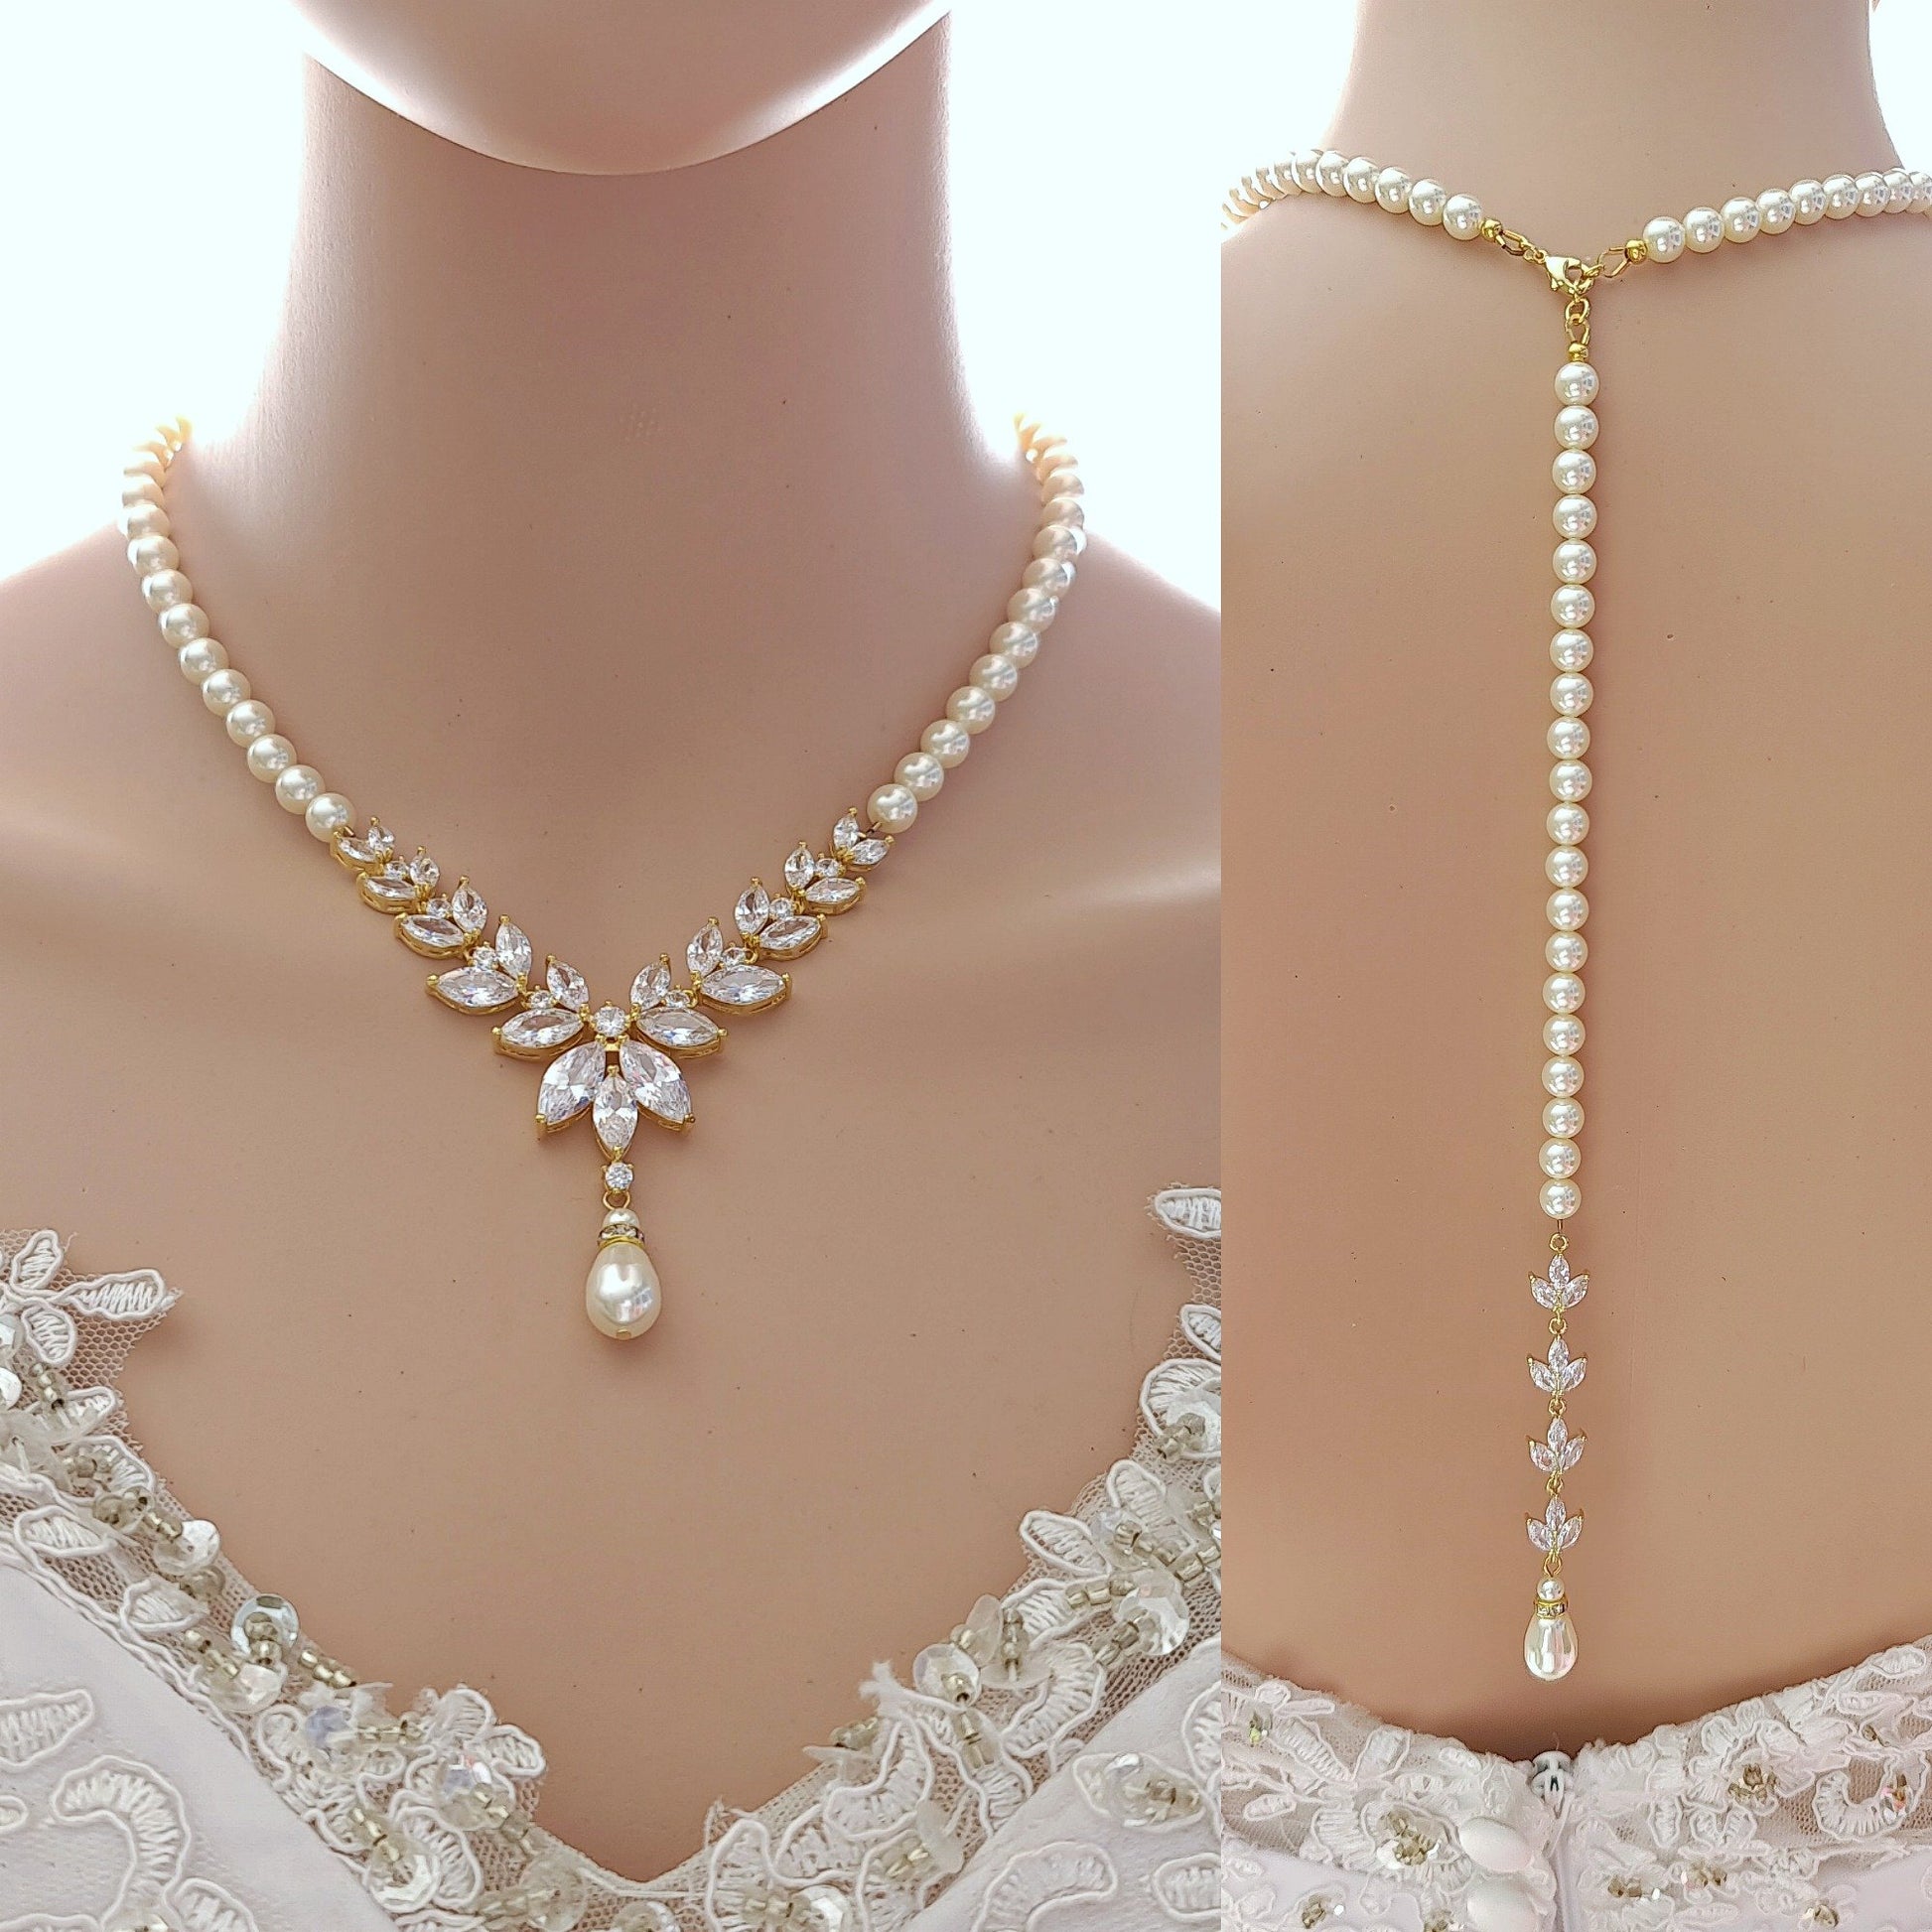 Pearl Bridal Jewelry Set in Ivory White or Cream Pearl Color with Necklace, Backdrop & Earrings-Katie - PoetryDesigns